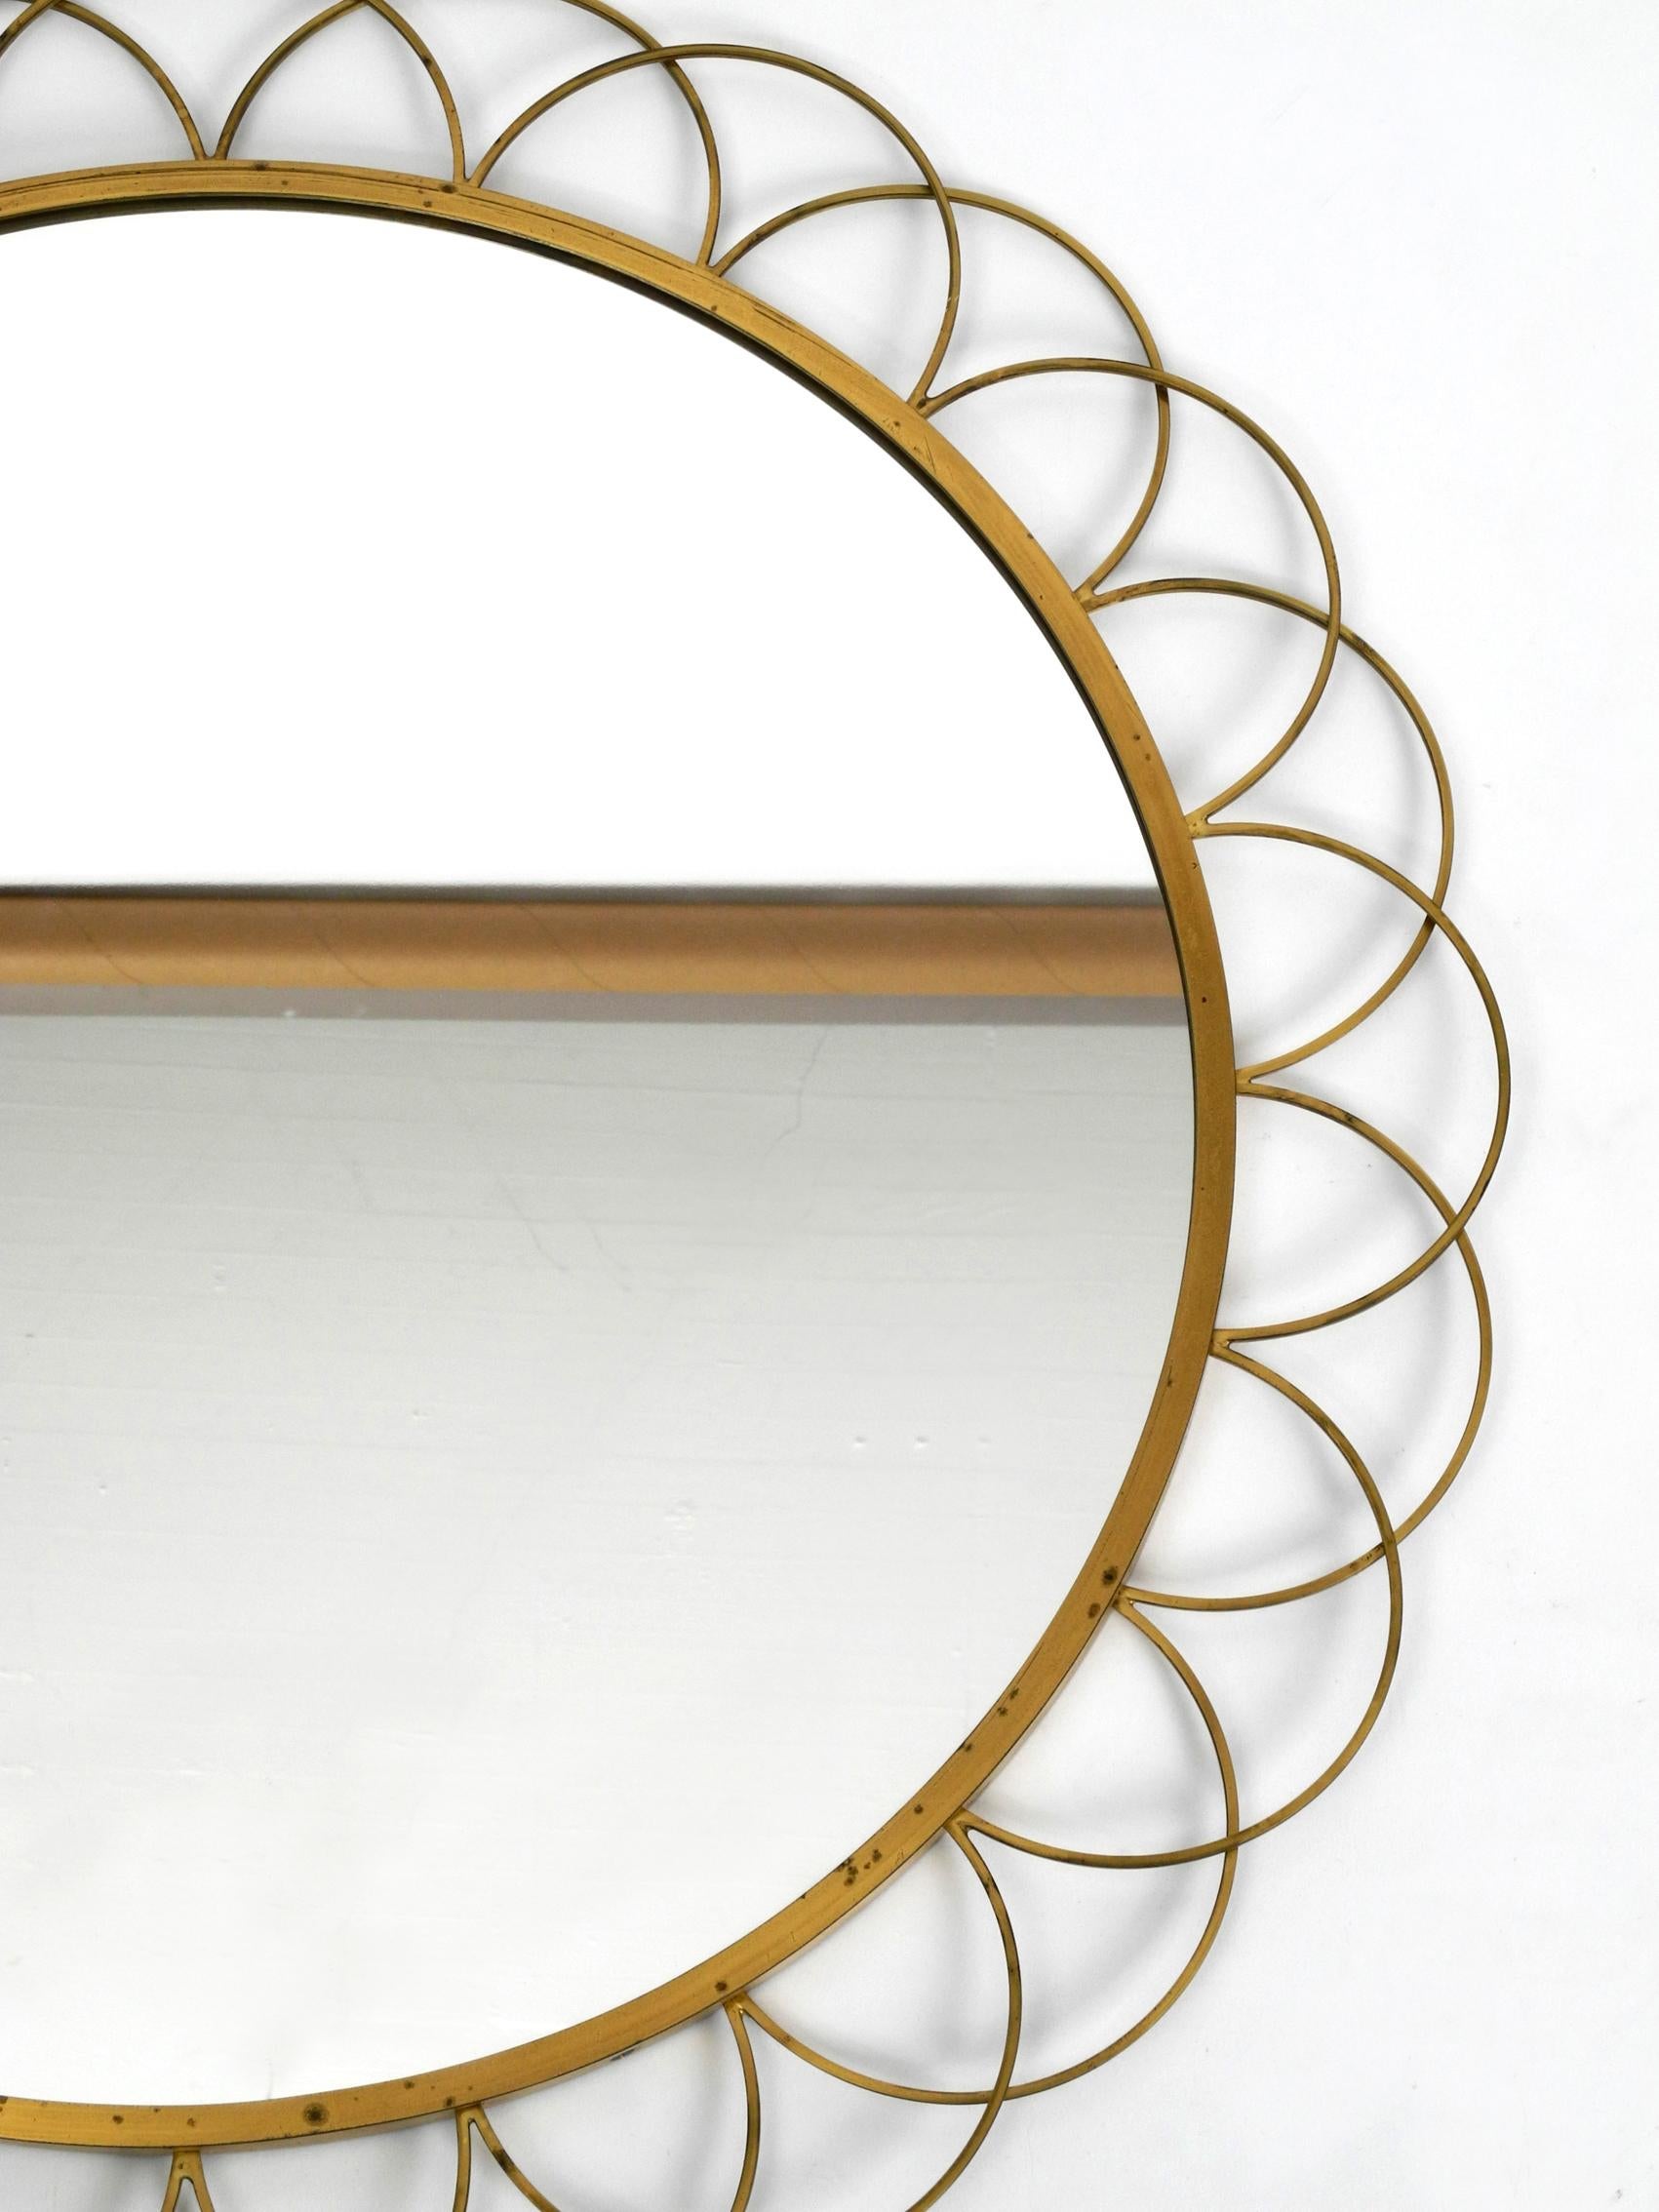 European 1960s Large Italian Brass Wall Mirror with Ring Design